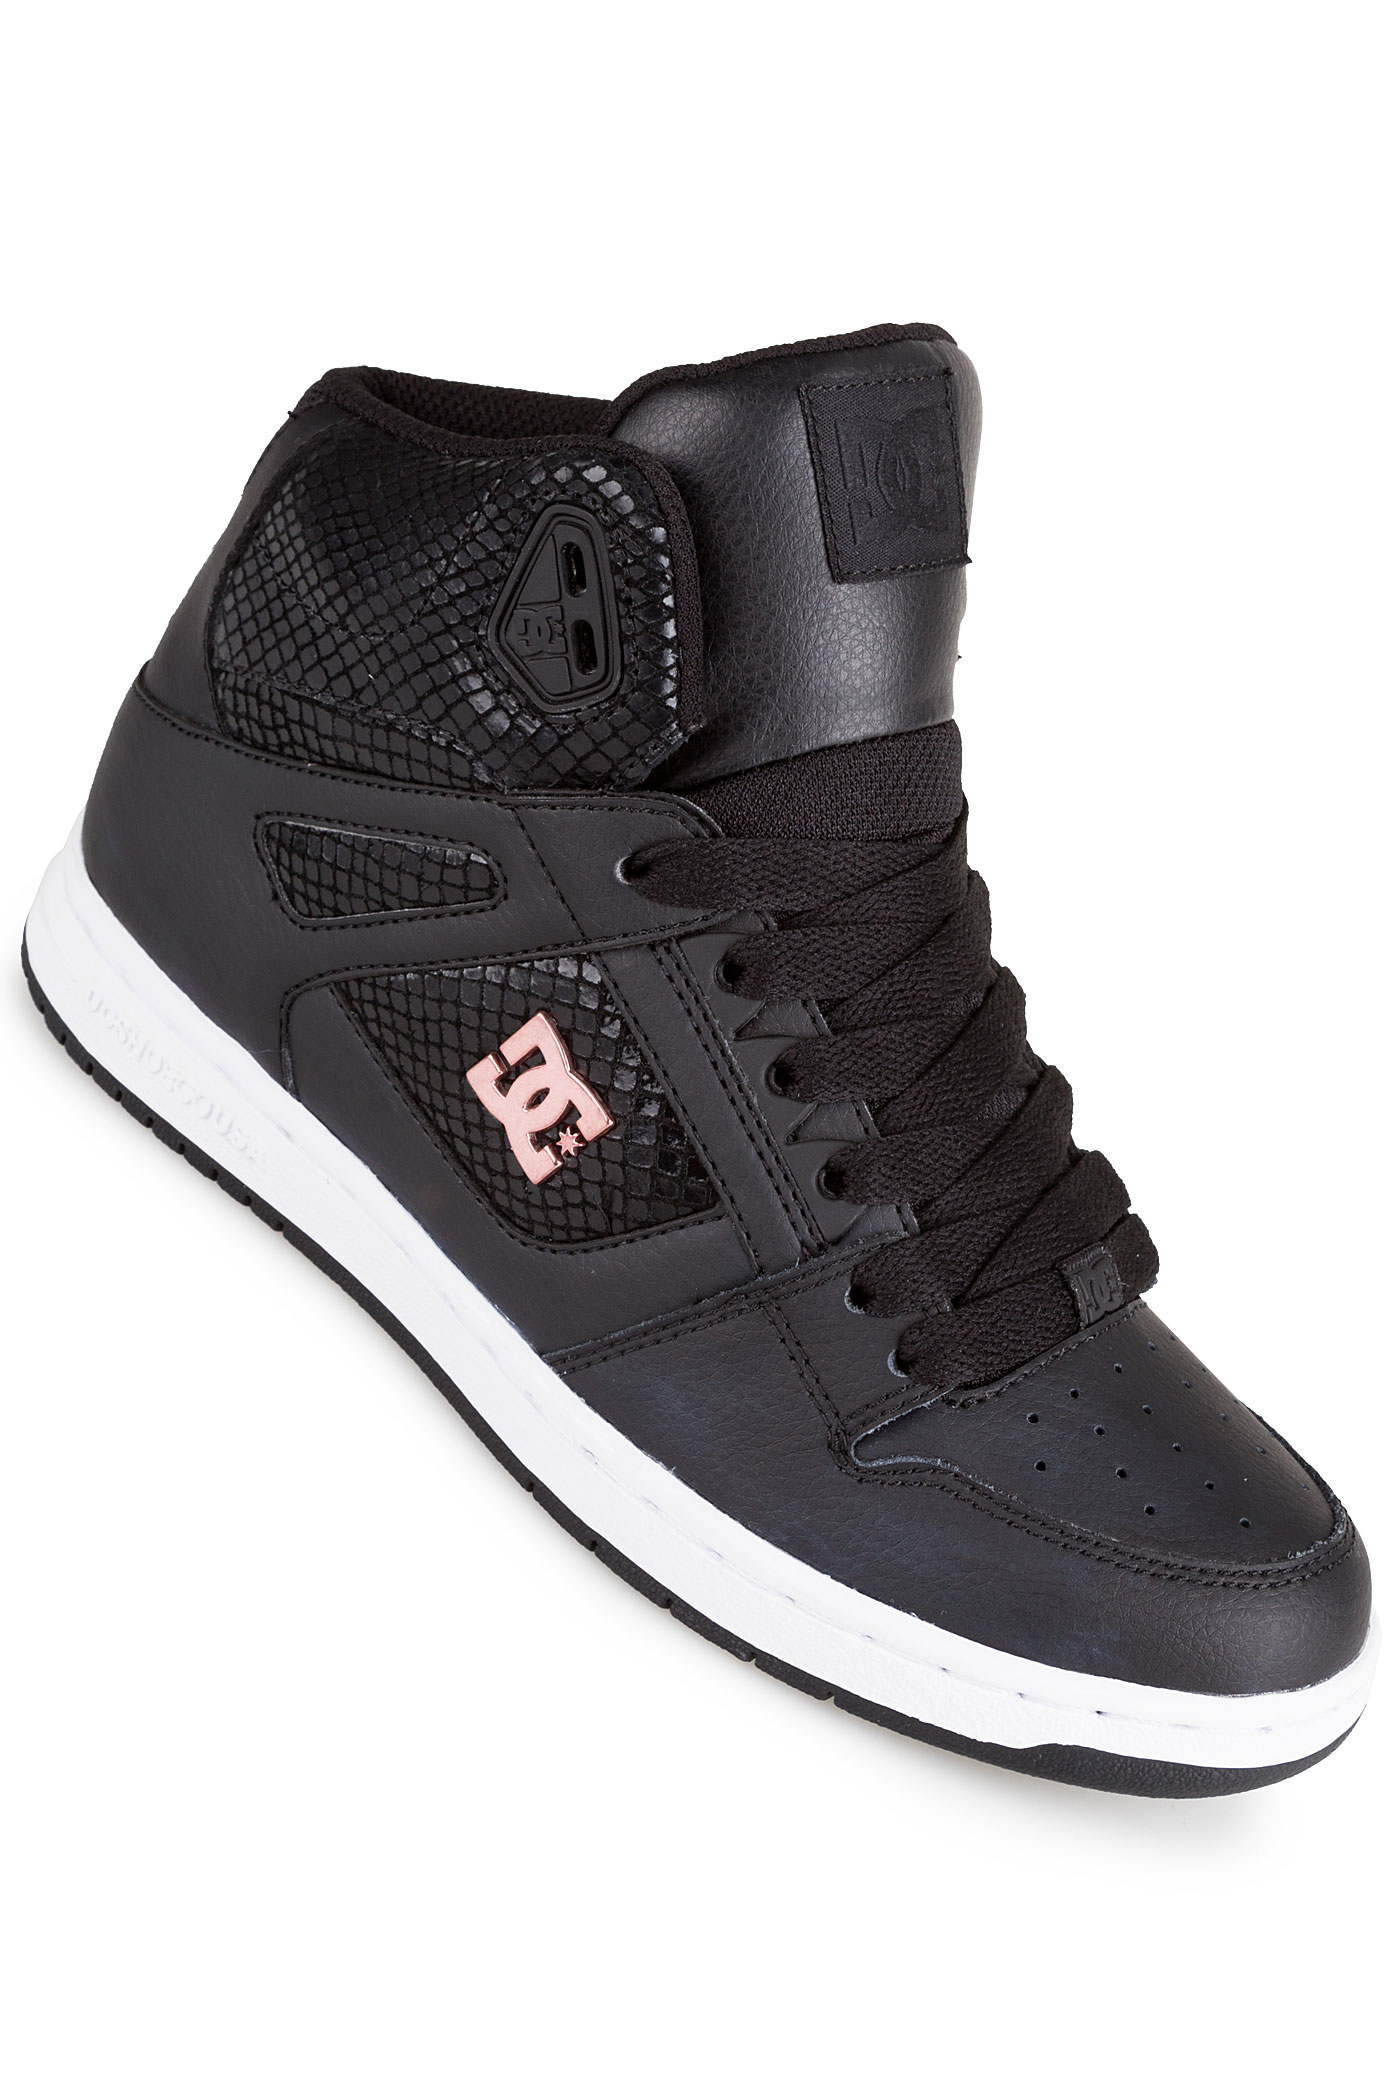 98 Sports Dc shoes rebound high se for Trend in 2022